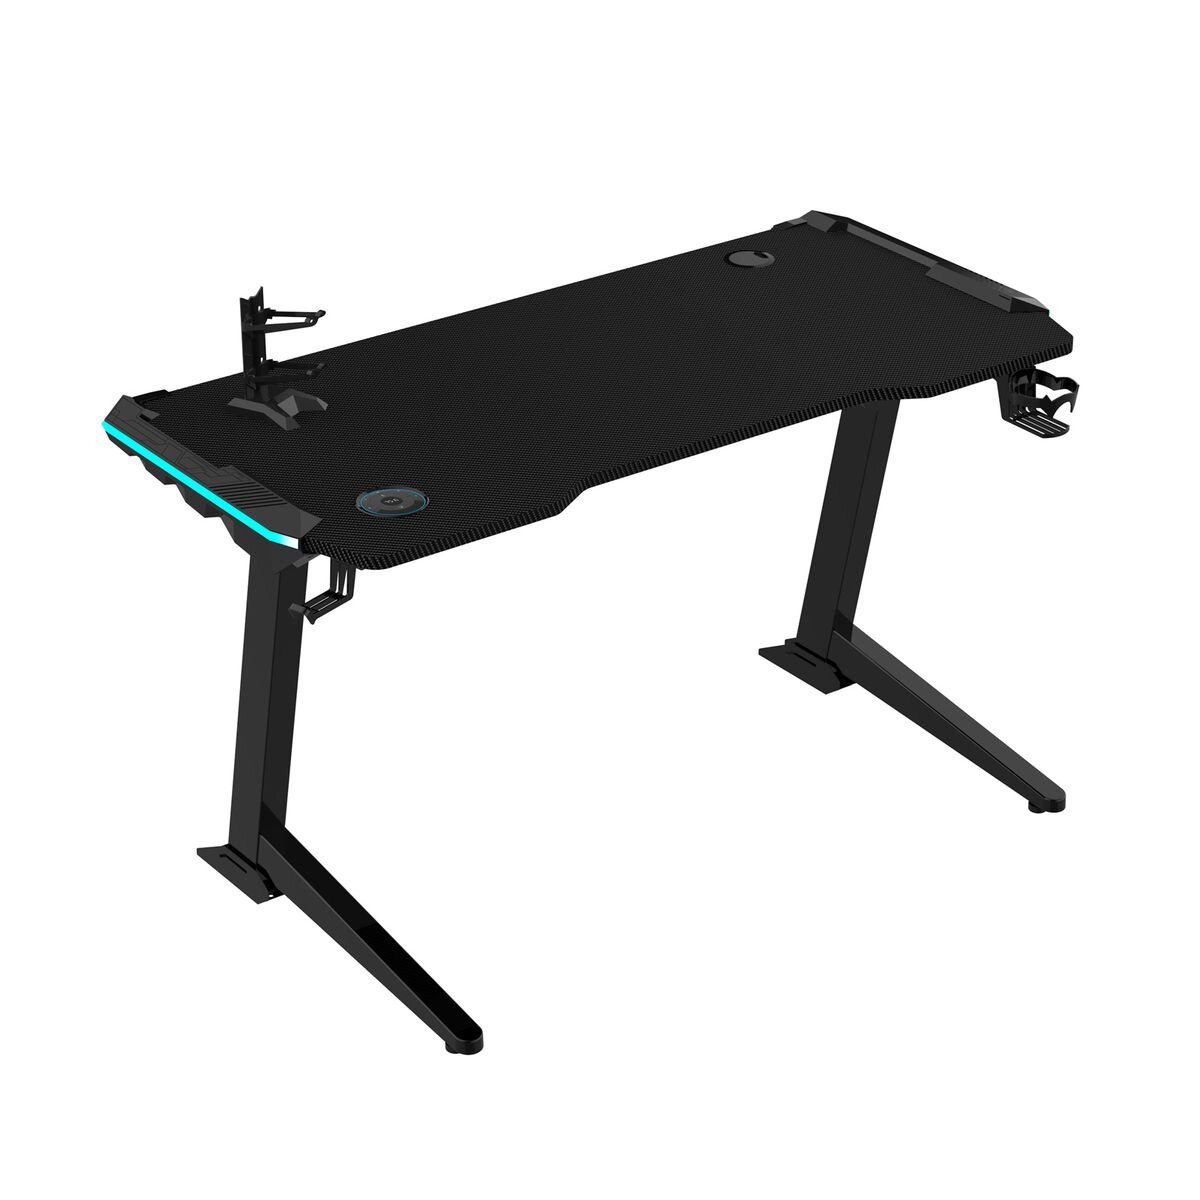 Rogueware Eliminator GET119X-L RGB Electric Sit/Stand Gaming Desk